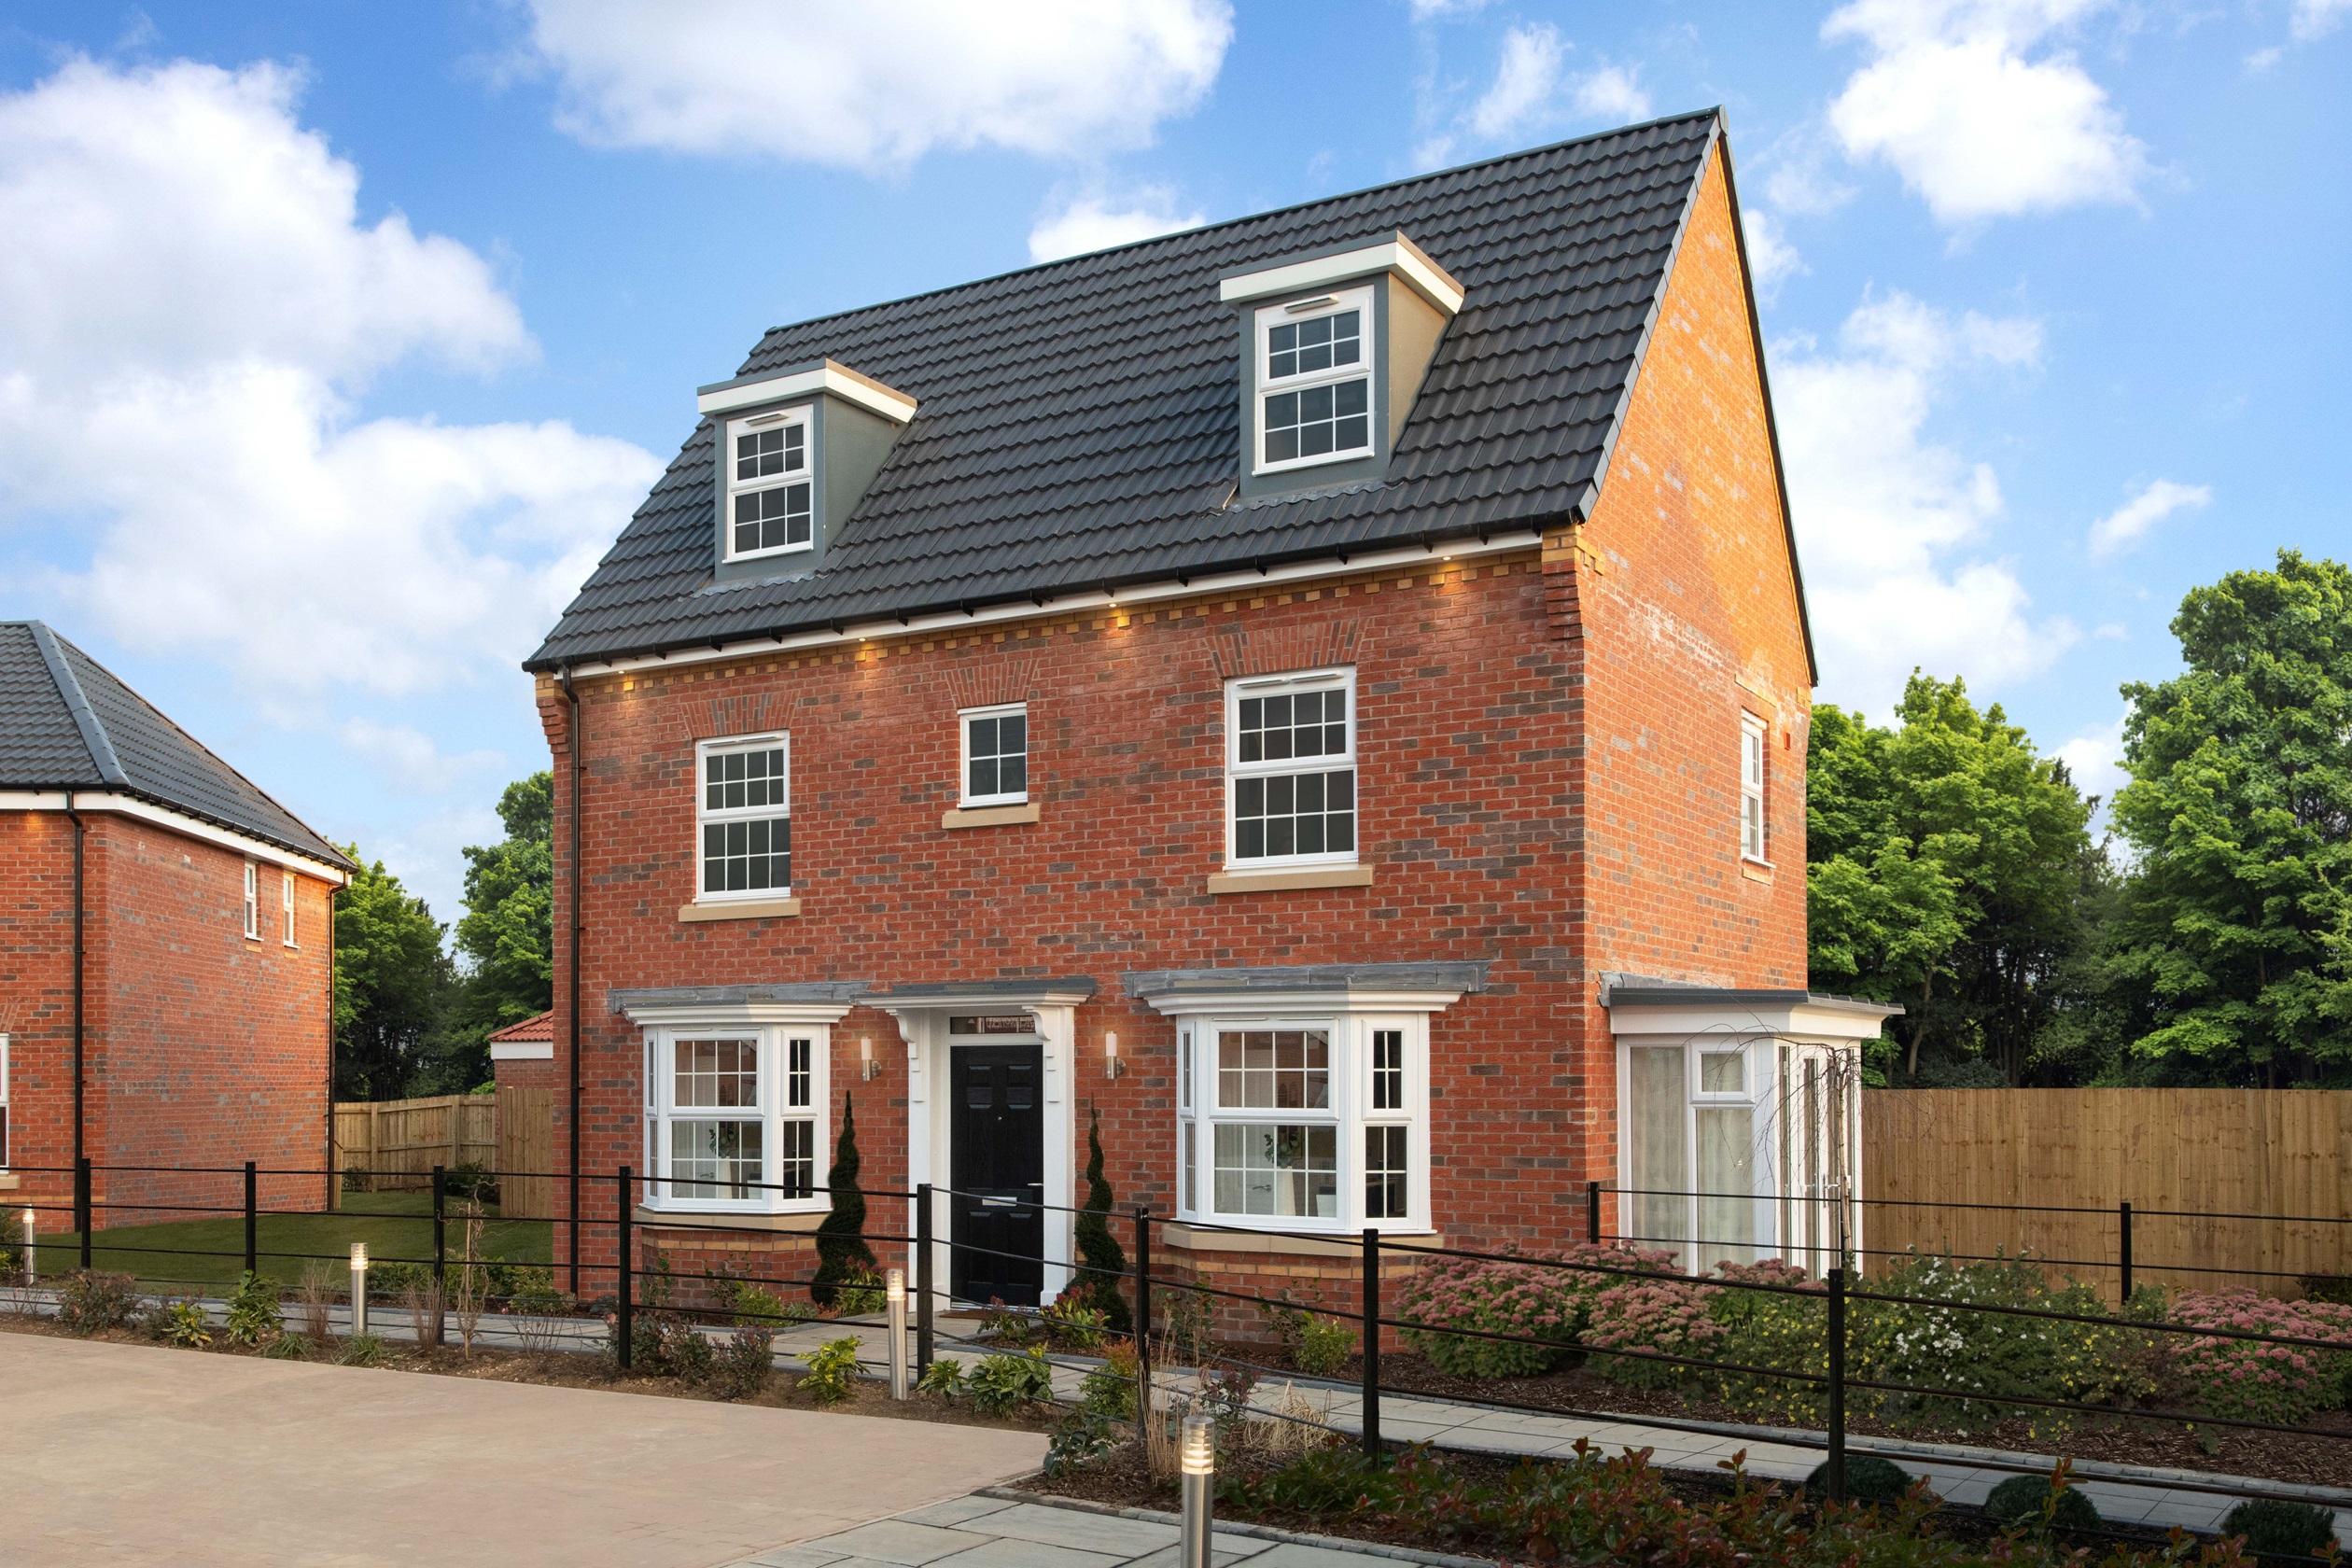 Property 1 of 8. Dwh Yw Manor Chase Hertford Show Home